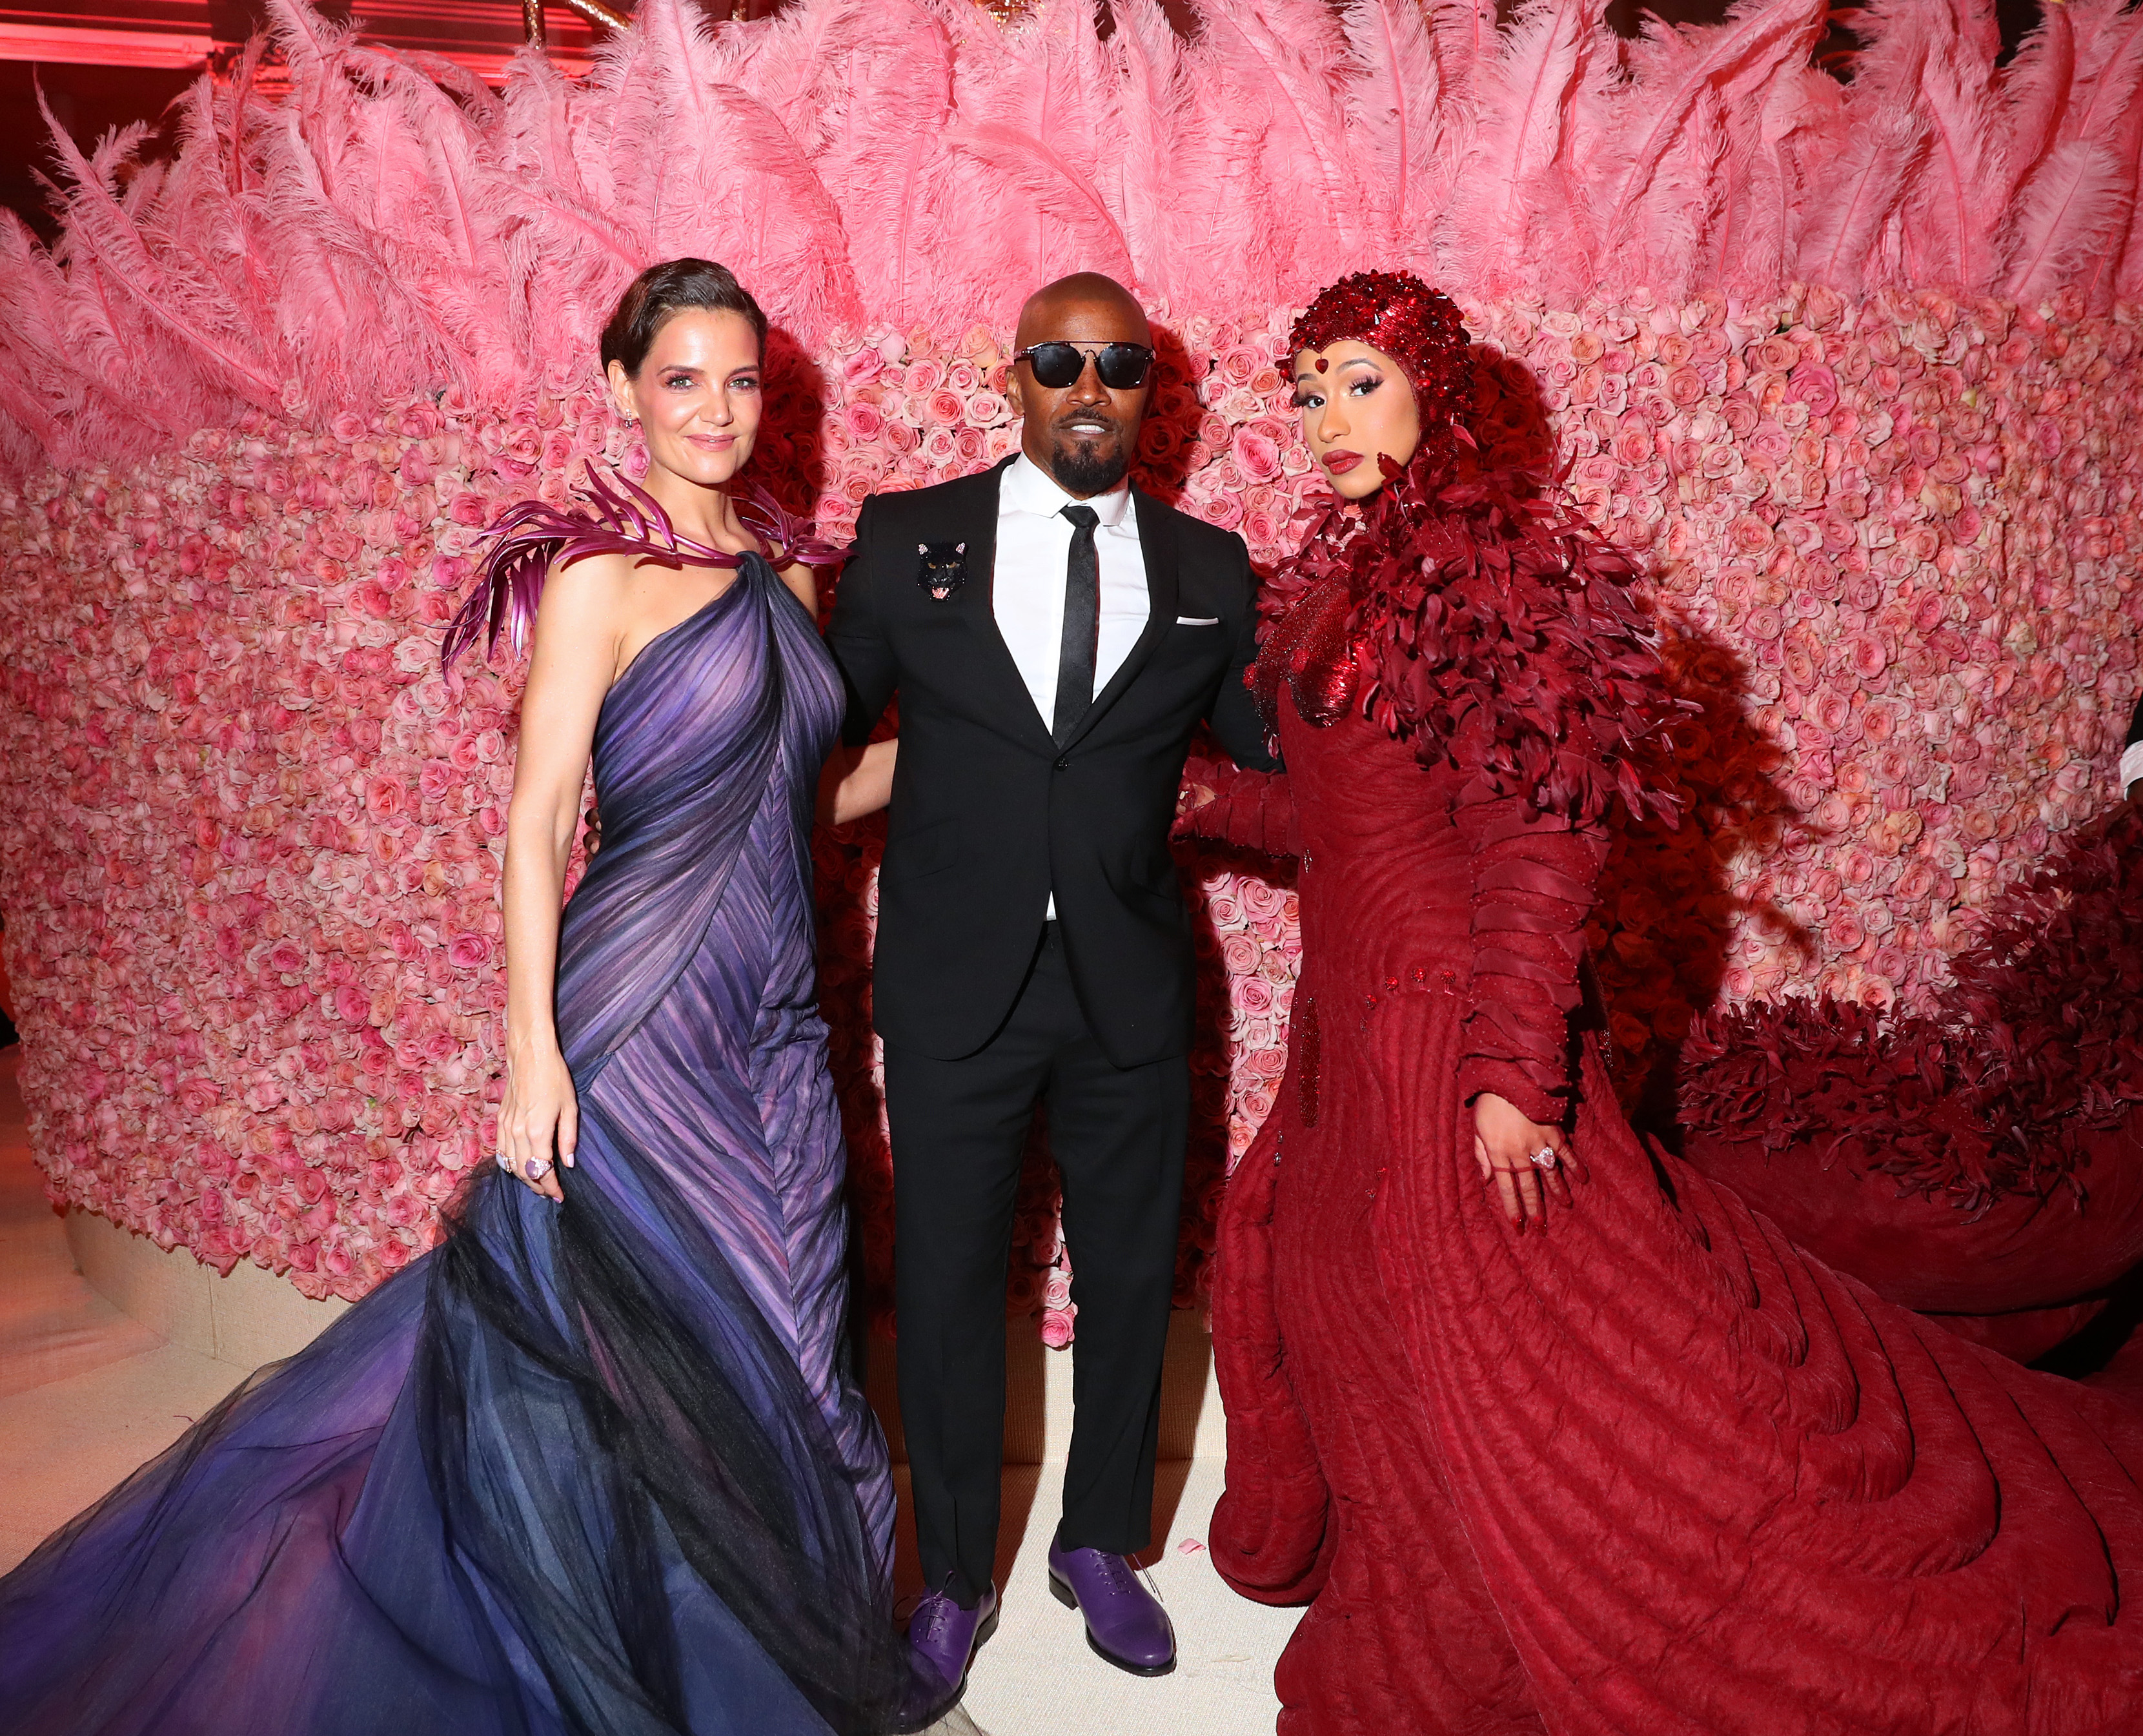 Katie Holmes, Jamie Foxx, and Cardi B at the 2019 Met Gala in New York City | Source: Getty Images